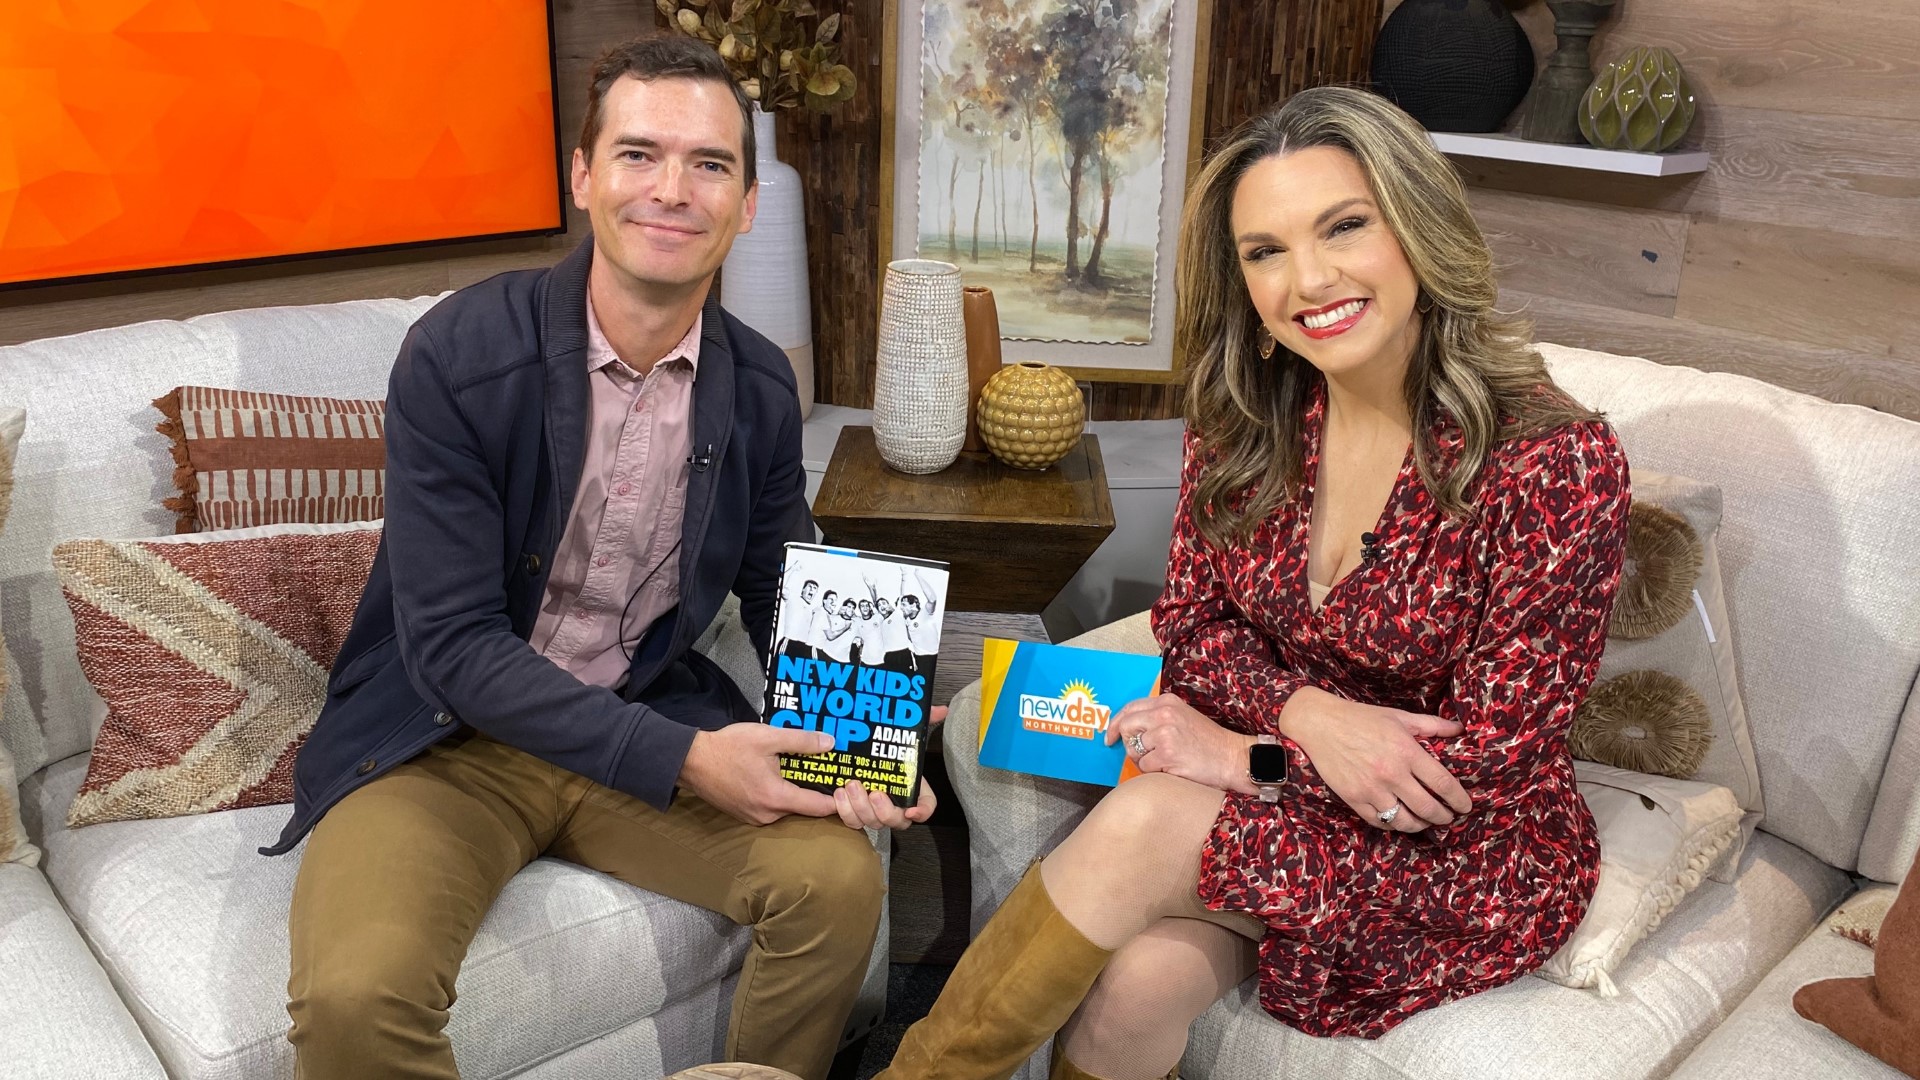 "New Kids in the World Cup" by Adam Elder takes a look back at America's history with soccer and the World Cup. #newdaynw